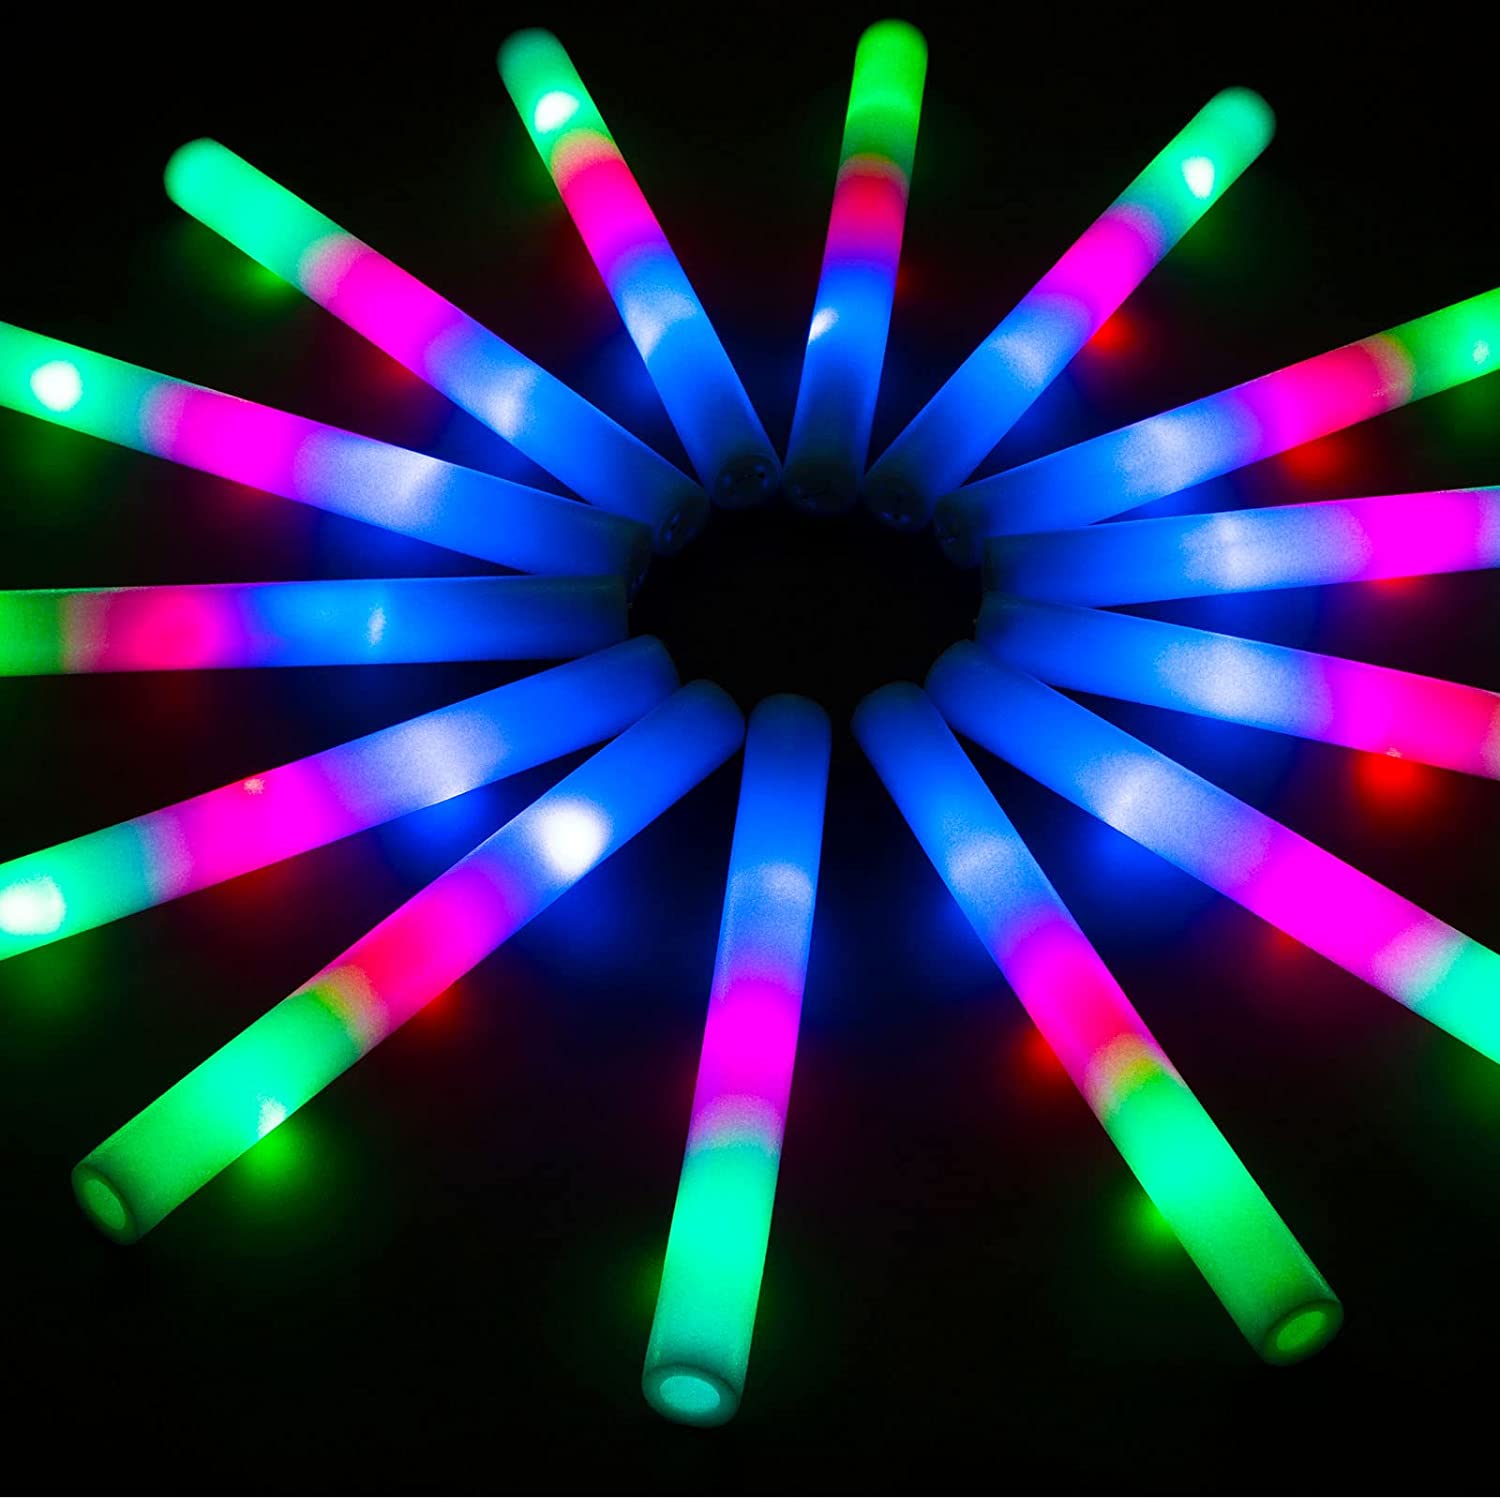 LifBetter 56 Pcs Foam Glow Sticks Bulk,Led Glow Sticks with 3 Modes Colorful Flashing,Long Life Battery Glow in The Dark Party S